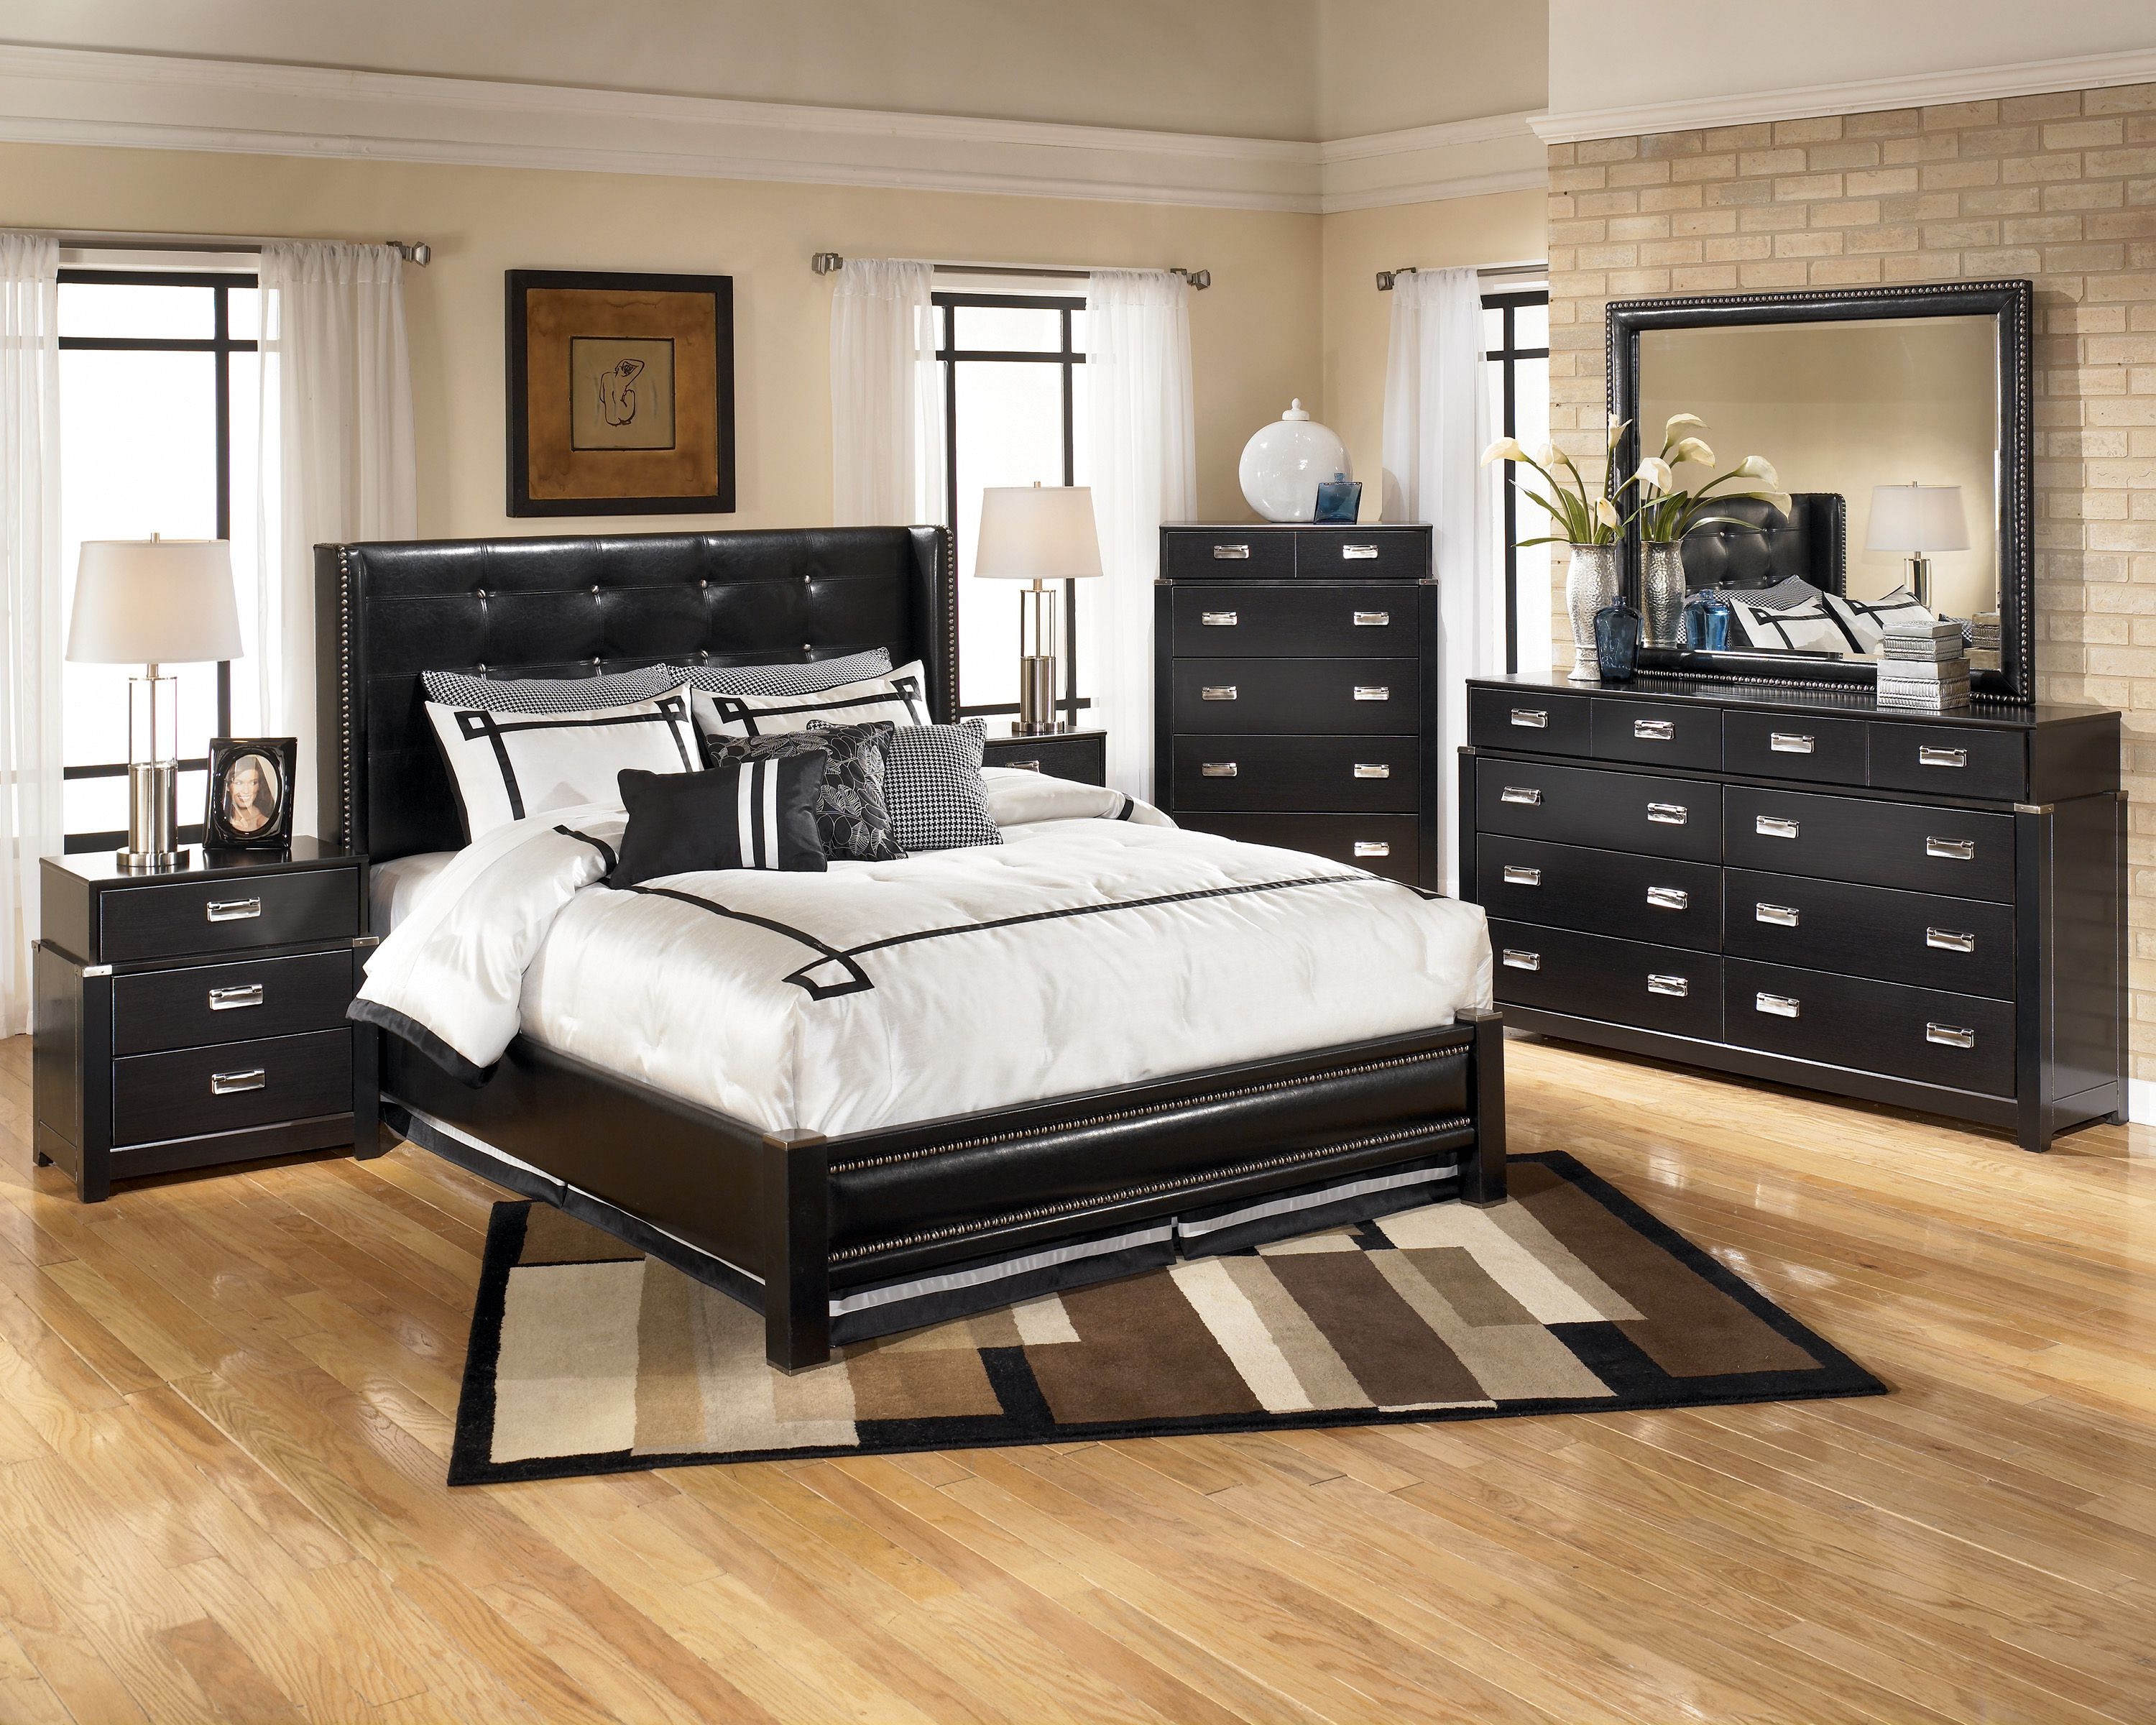 traditional quality bedroom furniture photo - 4